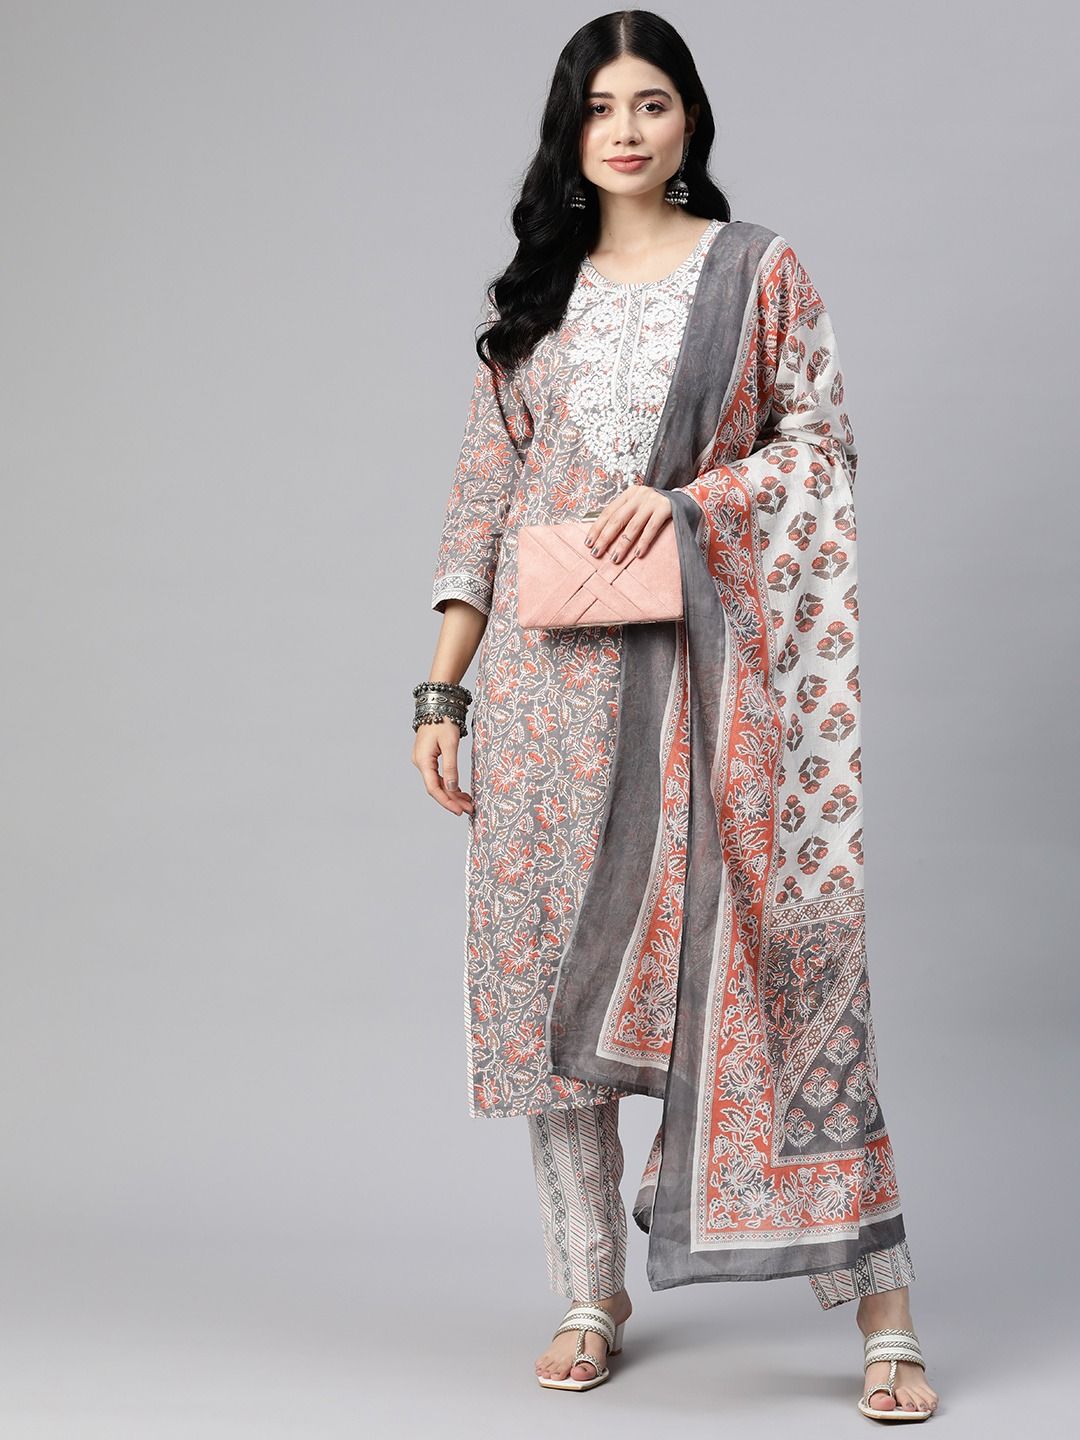 Straight Style Cotton Fabric Grey Color Kurta With Bottom With Dupatta